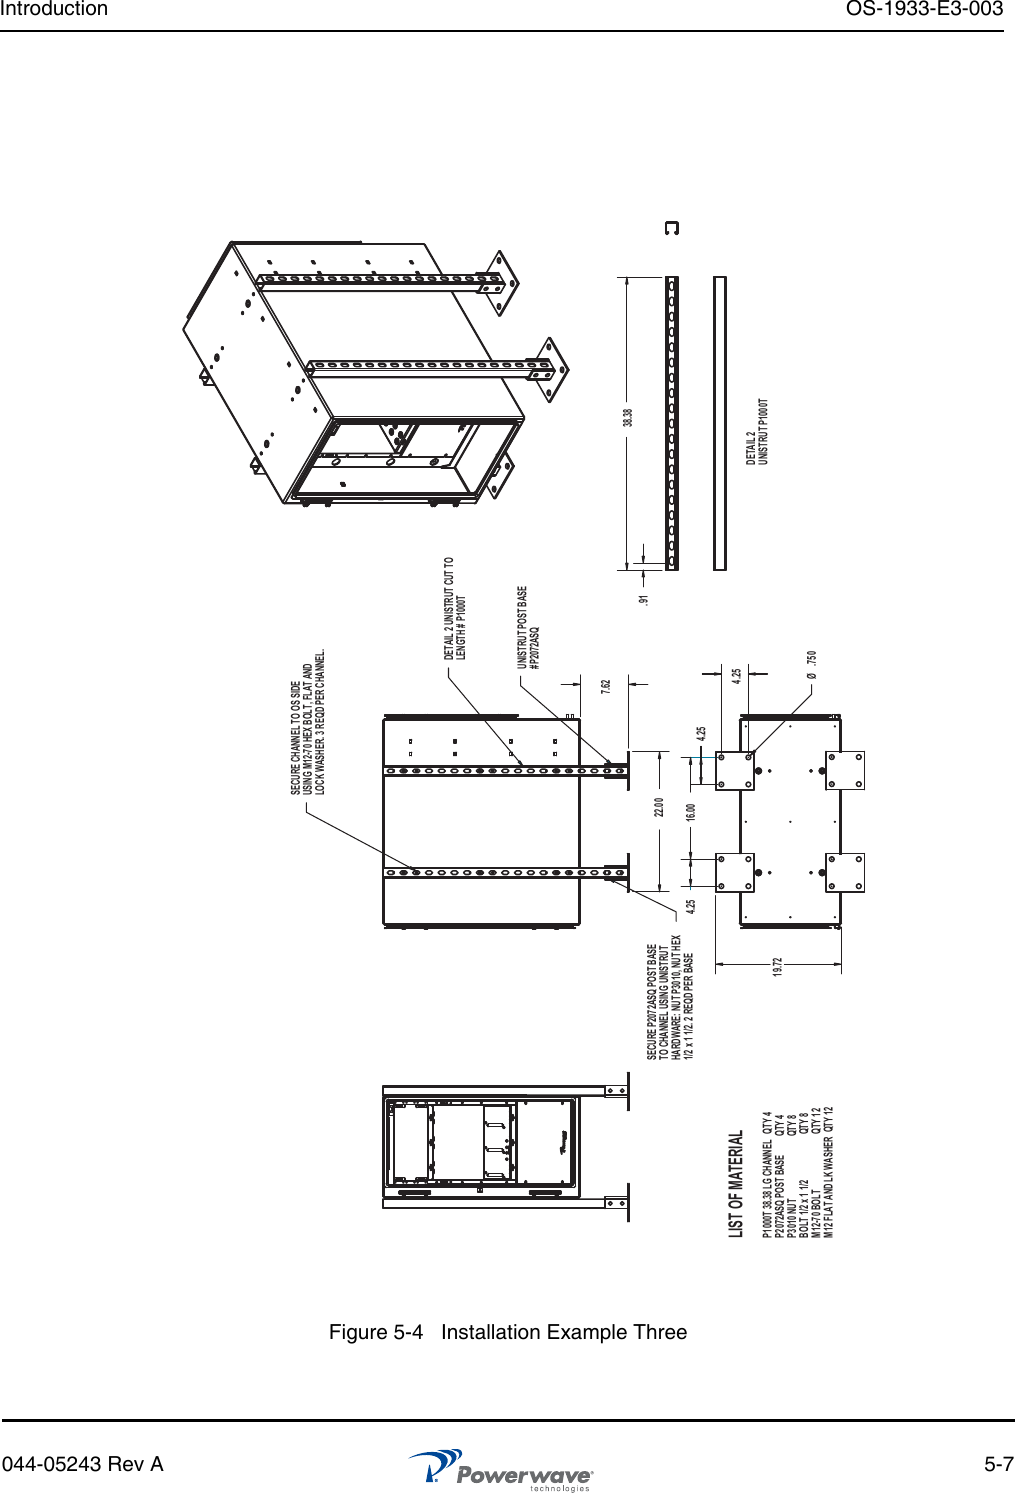 Introduction OS-1933-E3-003044-05243 Rev A 5-7Figure 5-4   Installation Example ThreeP1000T 38.38 LG CHANNEL   QTY 4P2072ASQ POST BASE         QTY 4P3010 NUT                              QTY 8BOLT 1/2 x 1 1/2                      QTY 8M12-70 BOLT                           QTY 12M12 FLAT AND LK WASHER  QTY 127.6222.00DETAIL 2 UNISTRUT CUT TOLENGTH # P1000TUNISTRUT POST BASE#P2072ASQSECURE P2072ASQ POST BASETO CHANNEL USING UNISTRUTHARDWARE: NUT P3010, NUT HEX1/2 x 1 1/2. 2 REQD PER BASESECURE CHANNEL TO OS SIDEUSING M12-70 HEX BOLT, FLAT ANDLOCK WASHER. 3 REQD PER CHANNEL.16.00 4.254.254.25Ø .75019.72DETAIL 2UNISTRUT P1000T38.38.91LIST OF MATERIAL